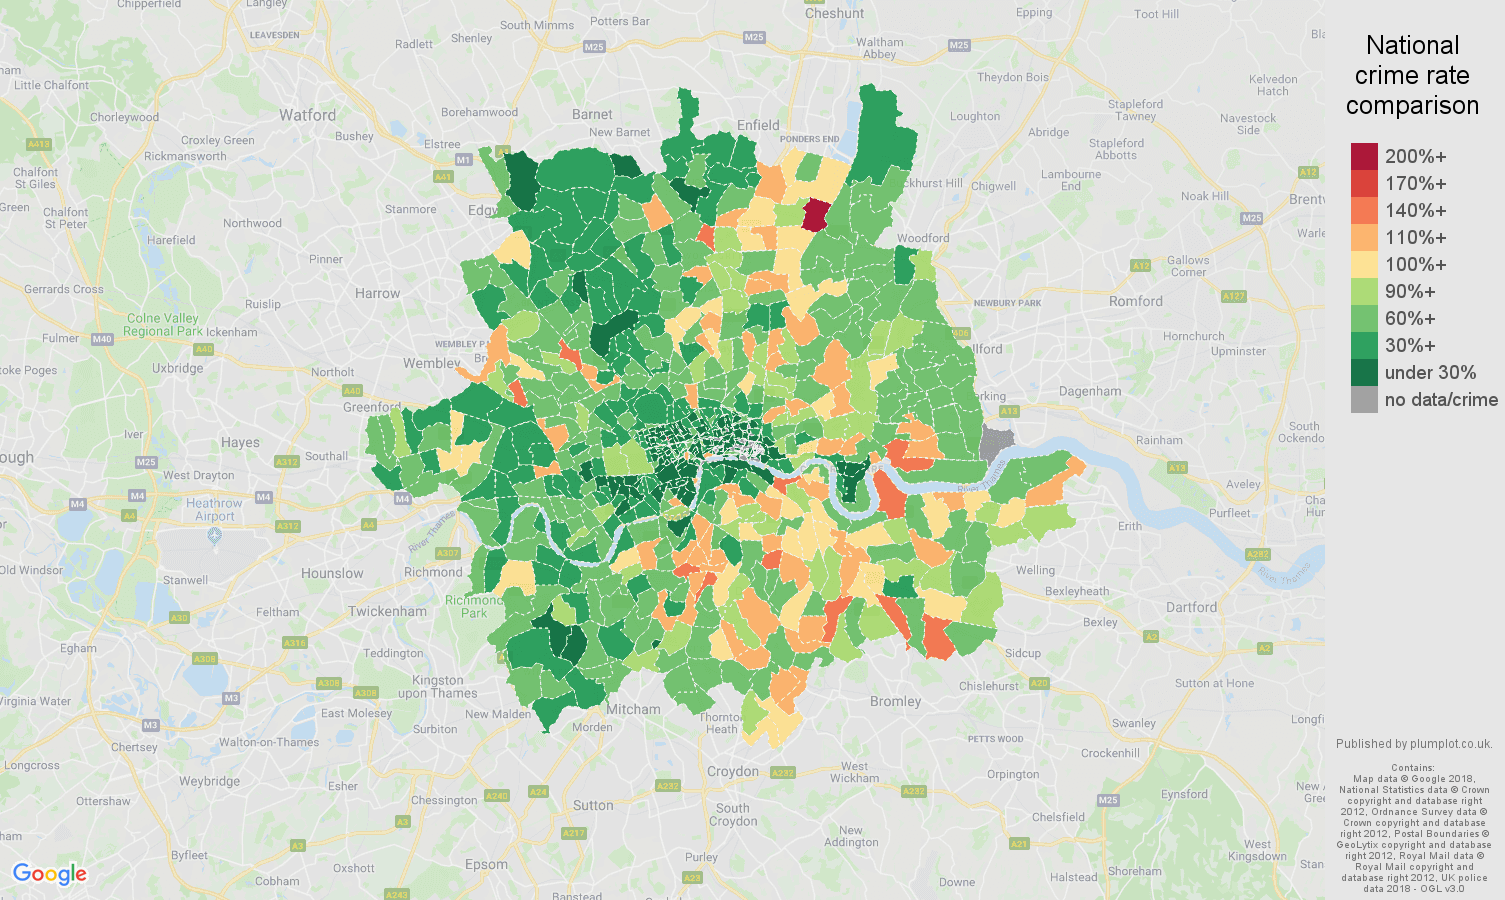 Inner London criminal damage and arson crime rate comparison map